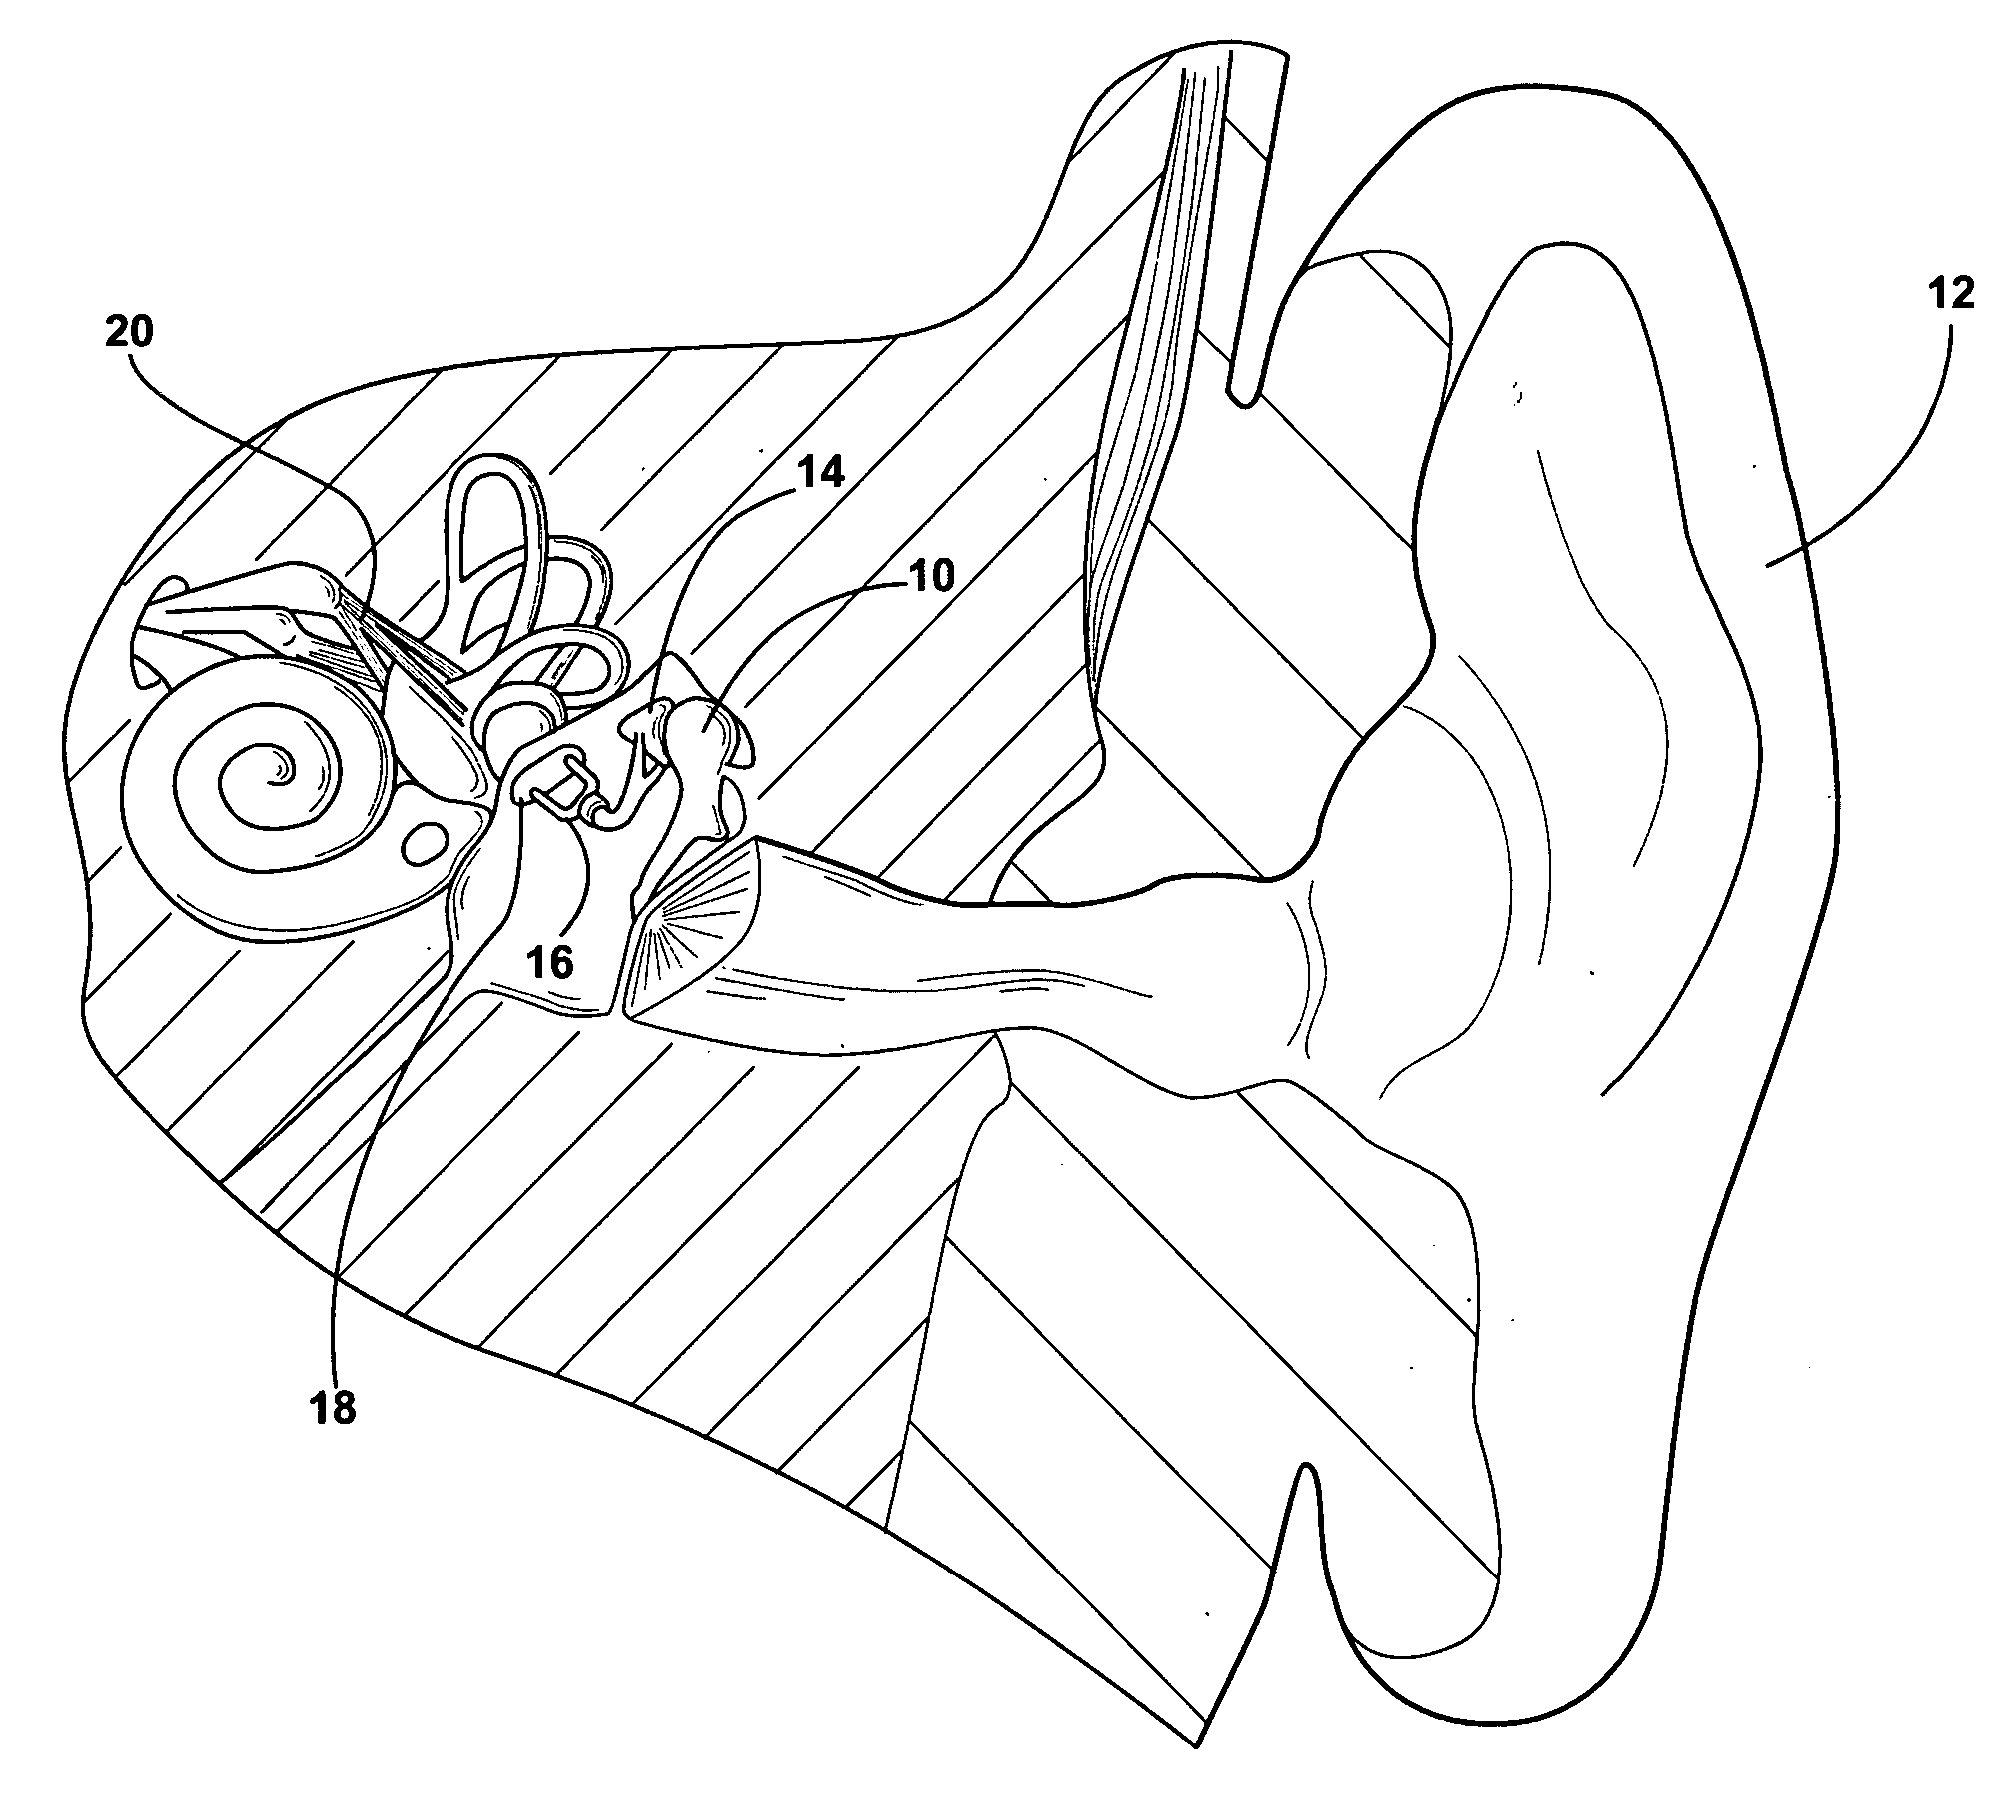 Middle ear reconstruction process and apparatus for performing the process